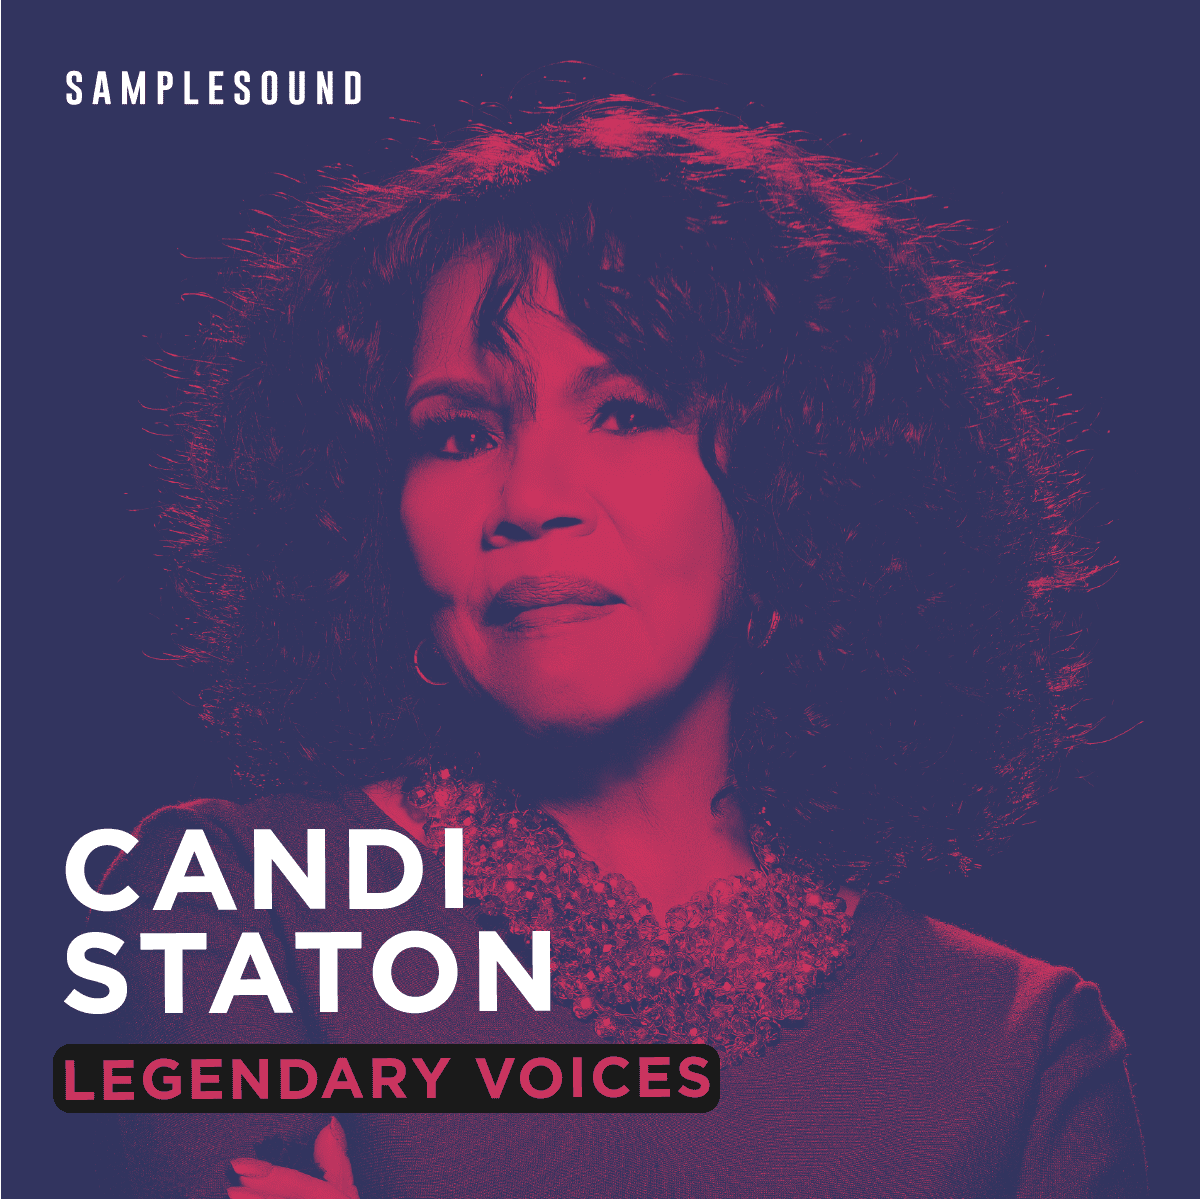 Legendary Voices: Candi Staton by Samplesound